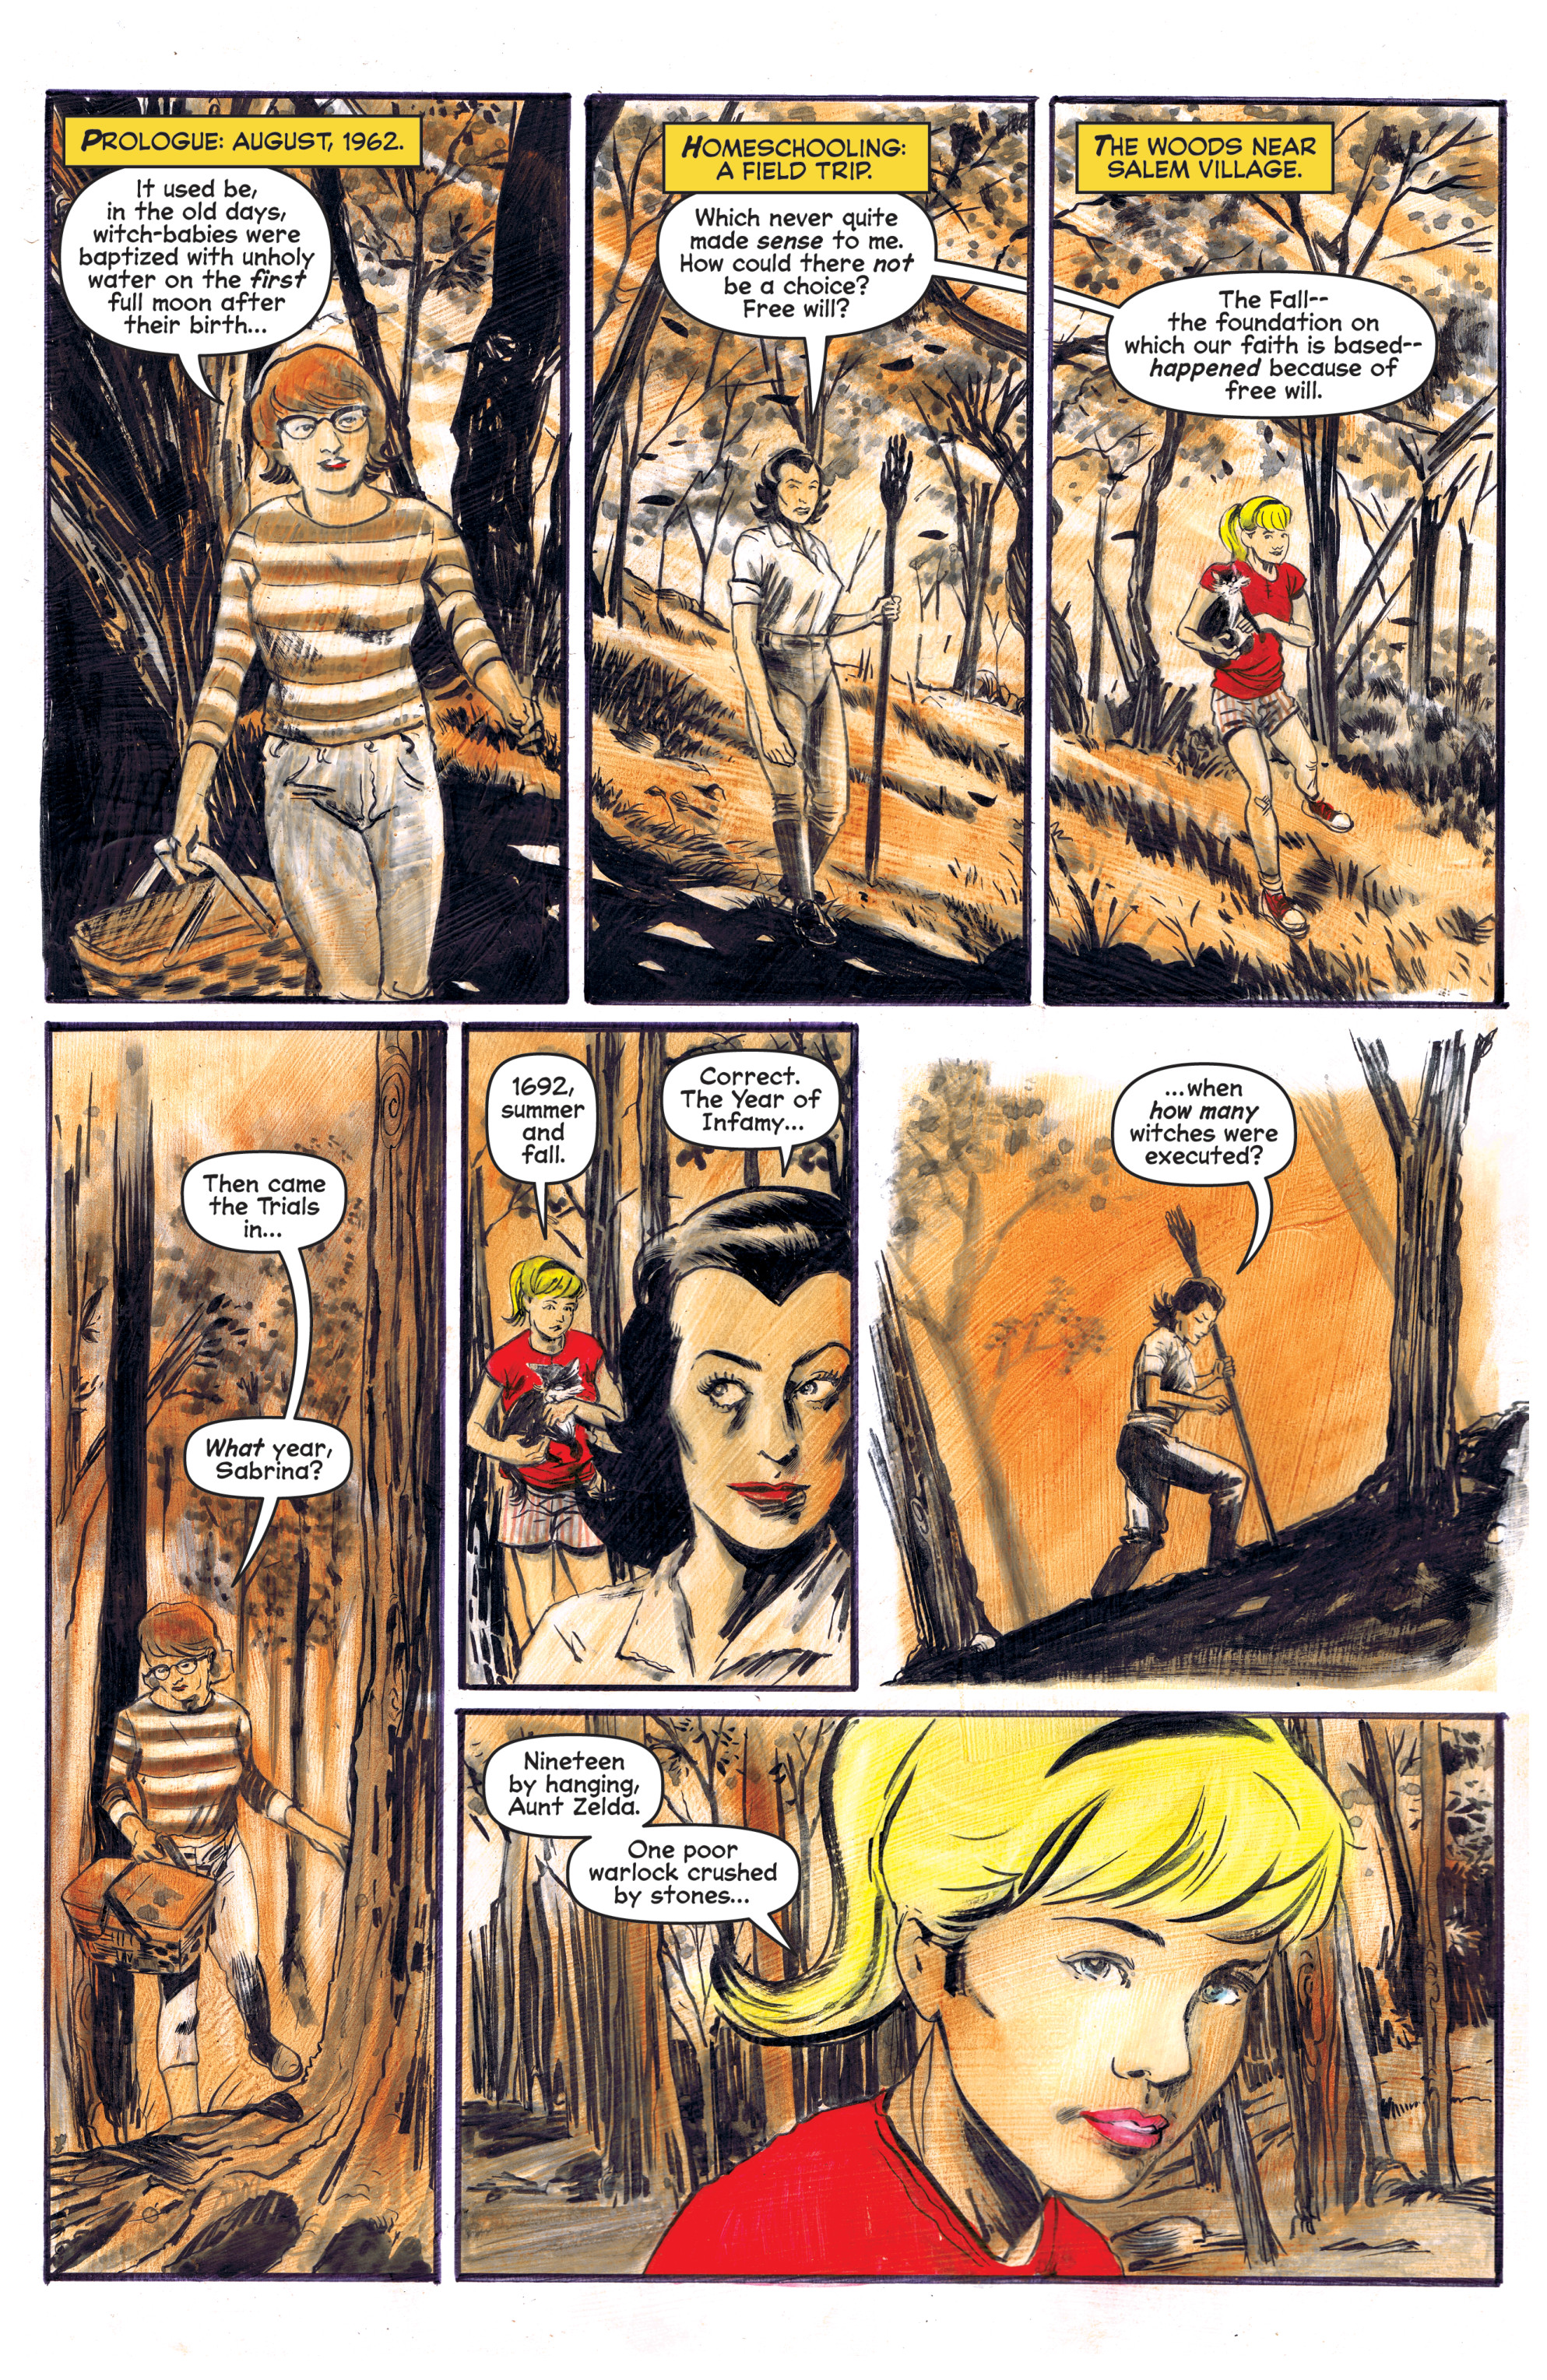 Chilling Adventures of Sabrina  (2014-): Chapter 3 - Page 3